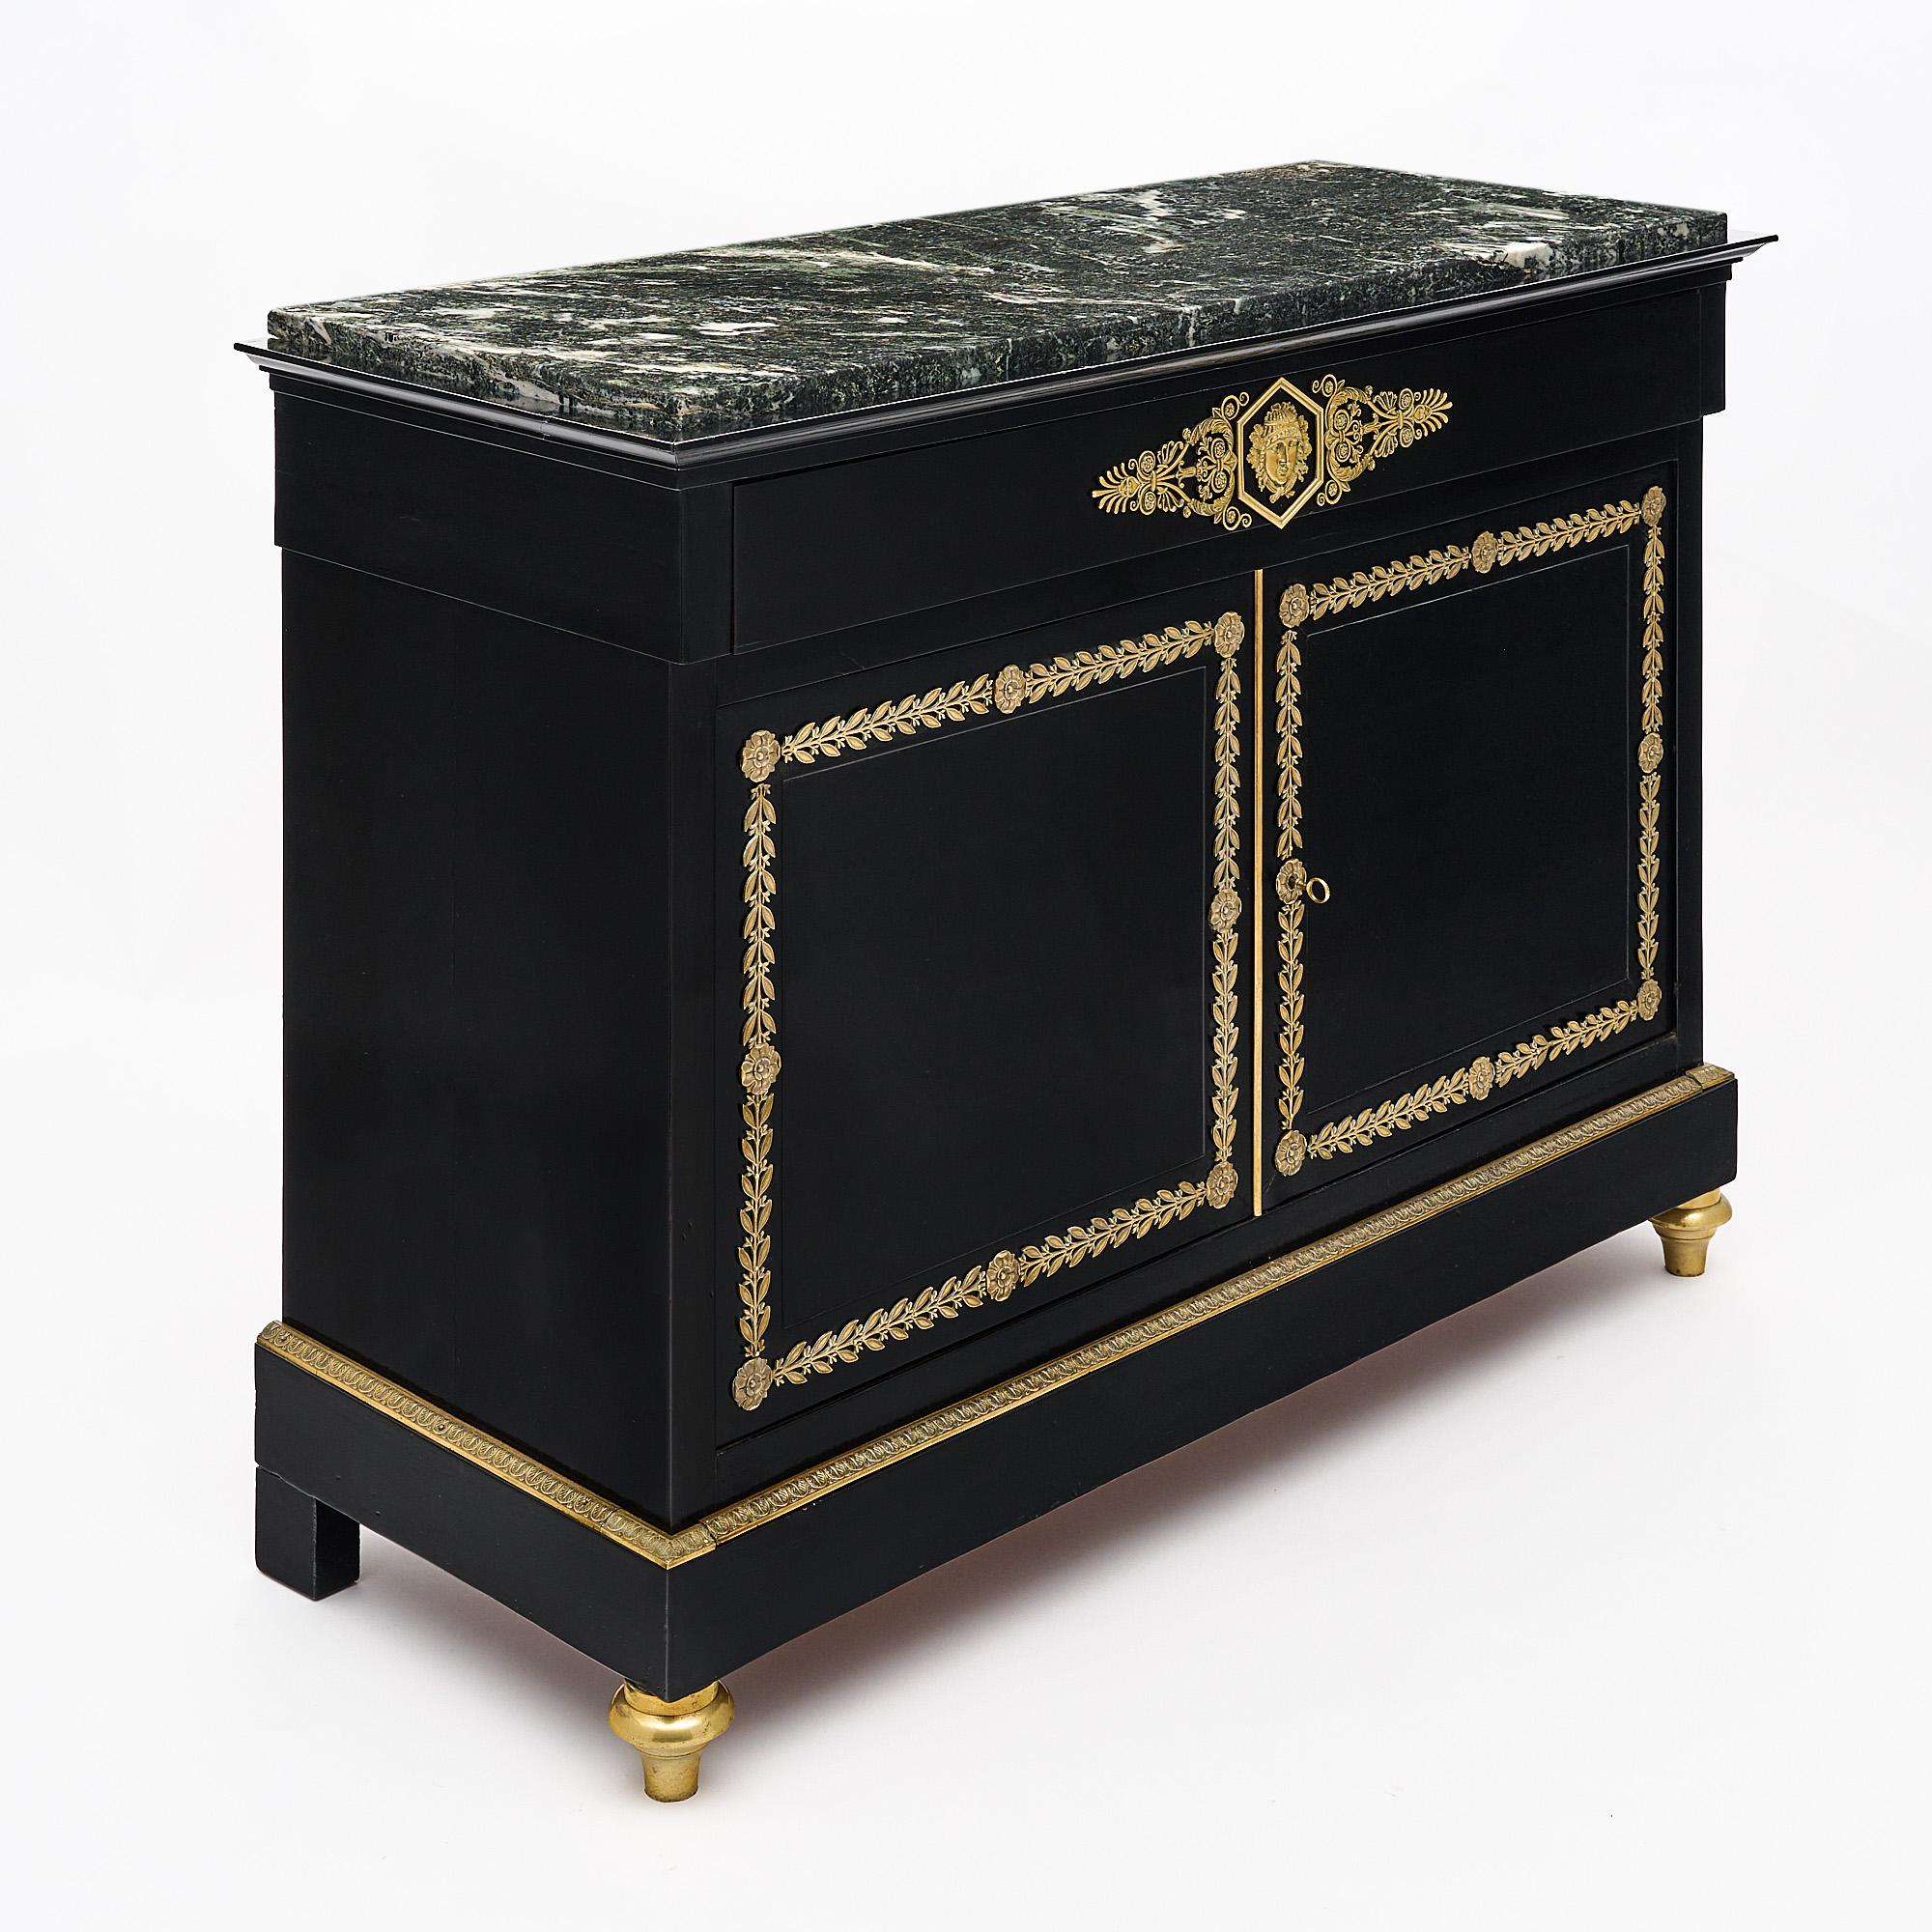 A superb antique French Directoire buffet in the manner of Jacob-Desmalter, the “ebeniste